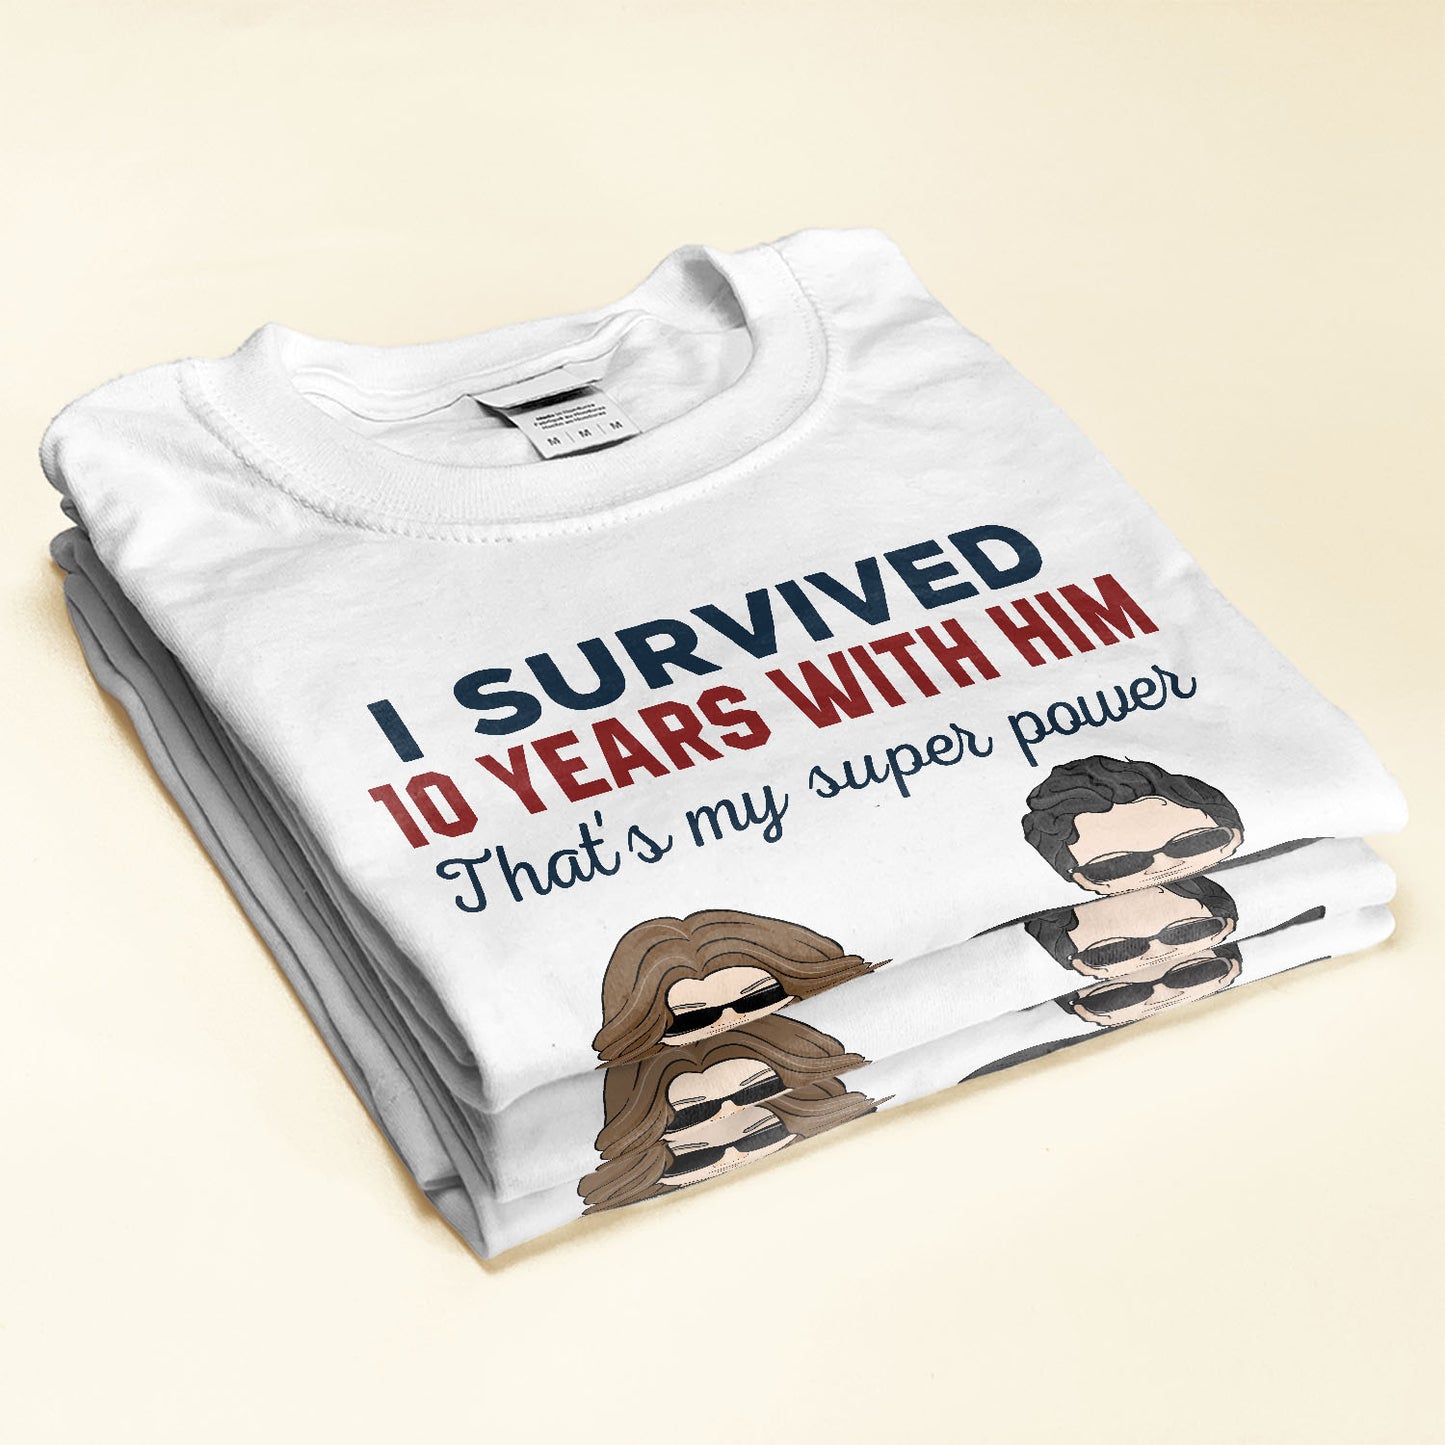 I Survived 10 Years With Him/Her - Personalized Shirt - Anniversary Gift For Husband And Wife - Man And Woman